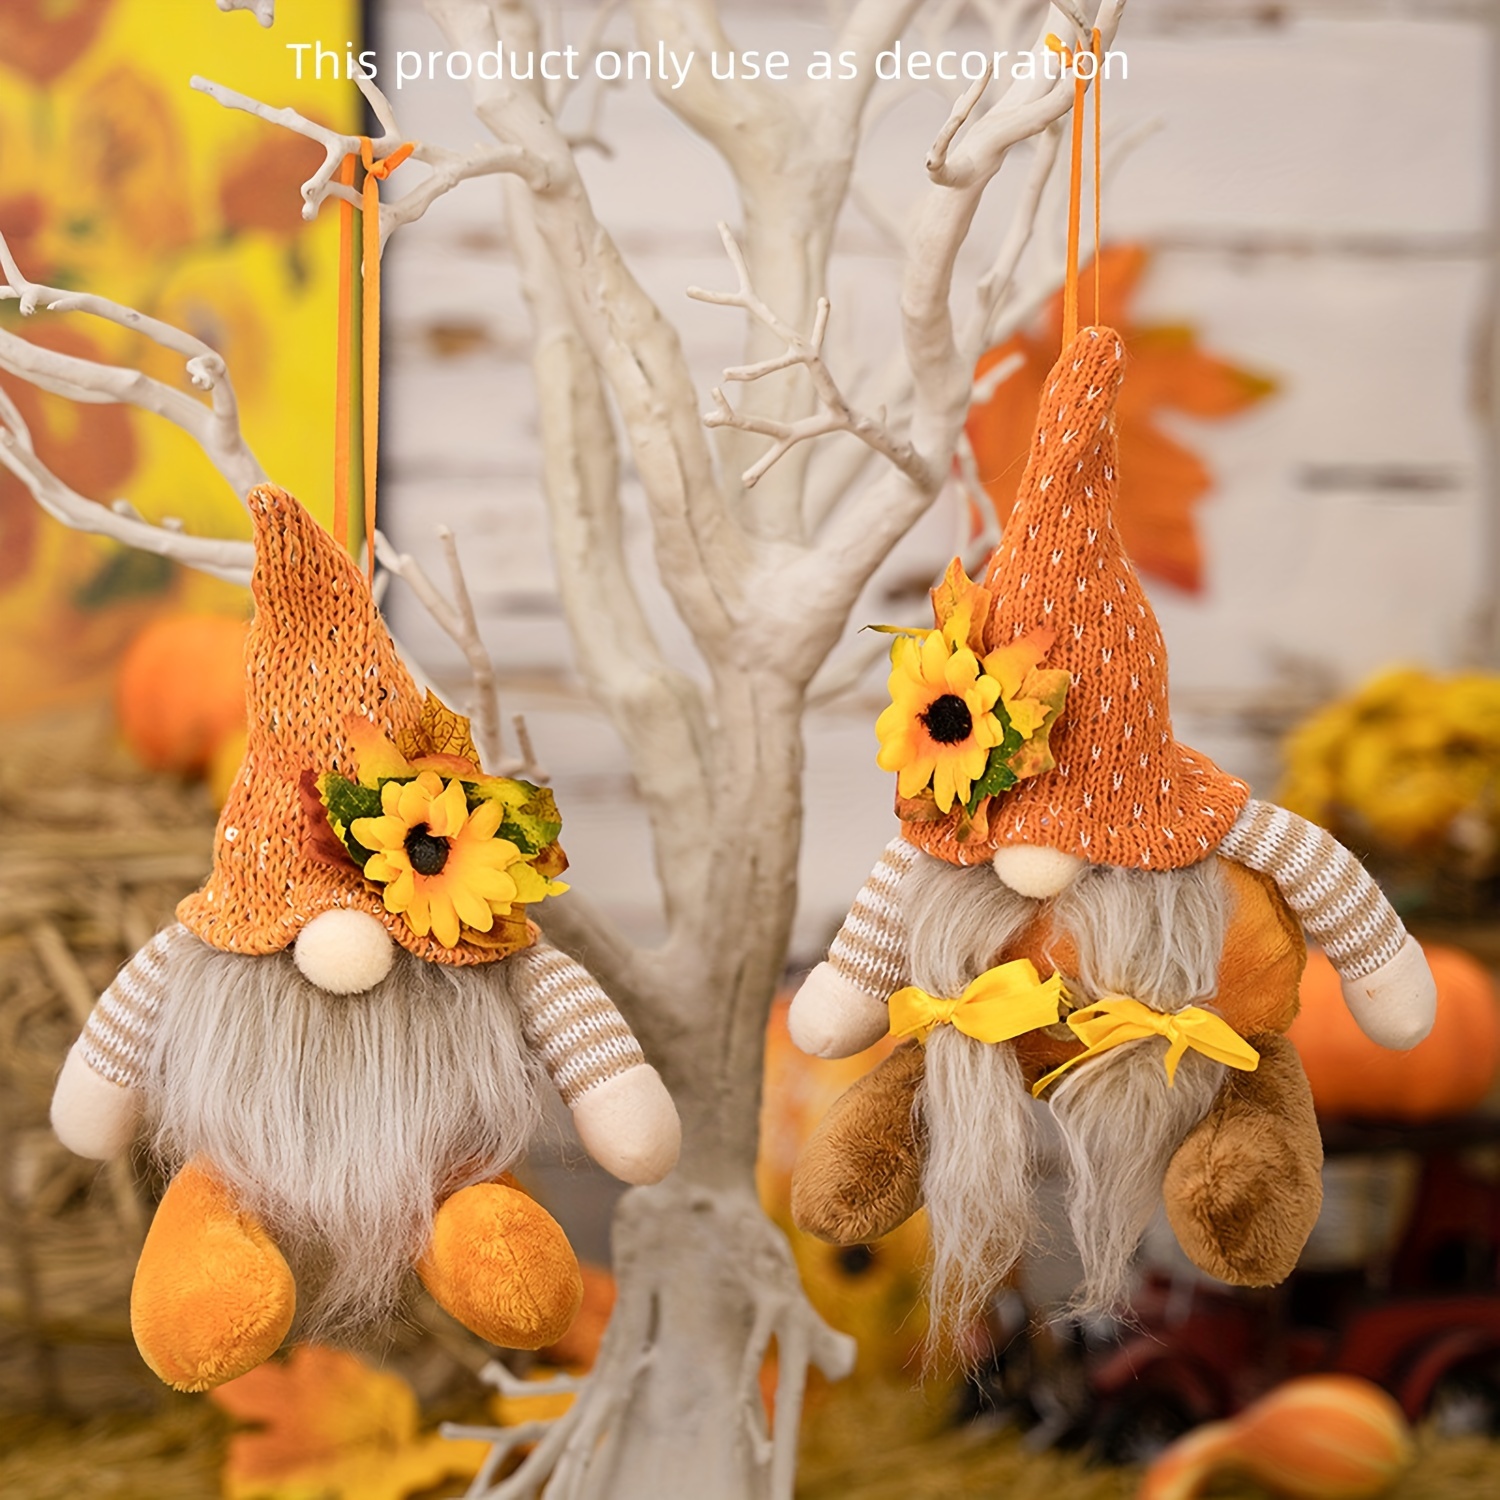 

Autumn Harvest & Halloween Decor - 1pc/2pcs Sunflower & Maple Leaf Faceless Dolls For Thanksgiving Party, Home, Yard, And Farmhouse Decorations